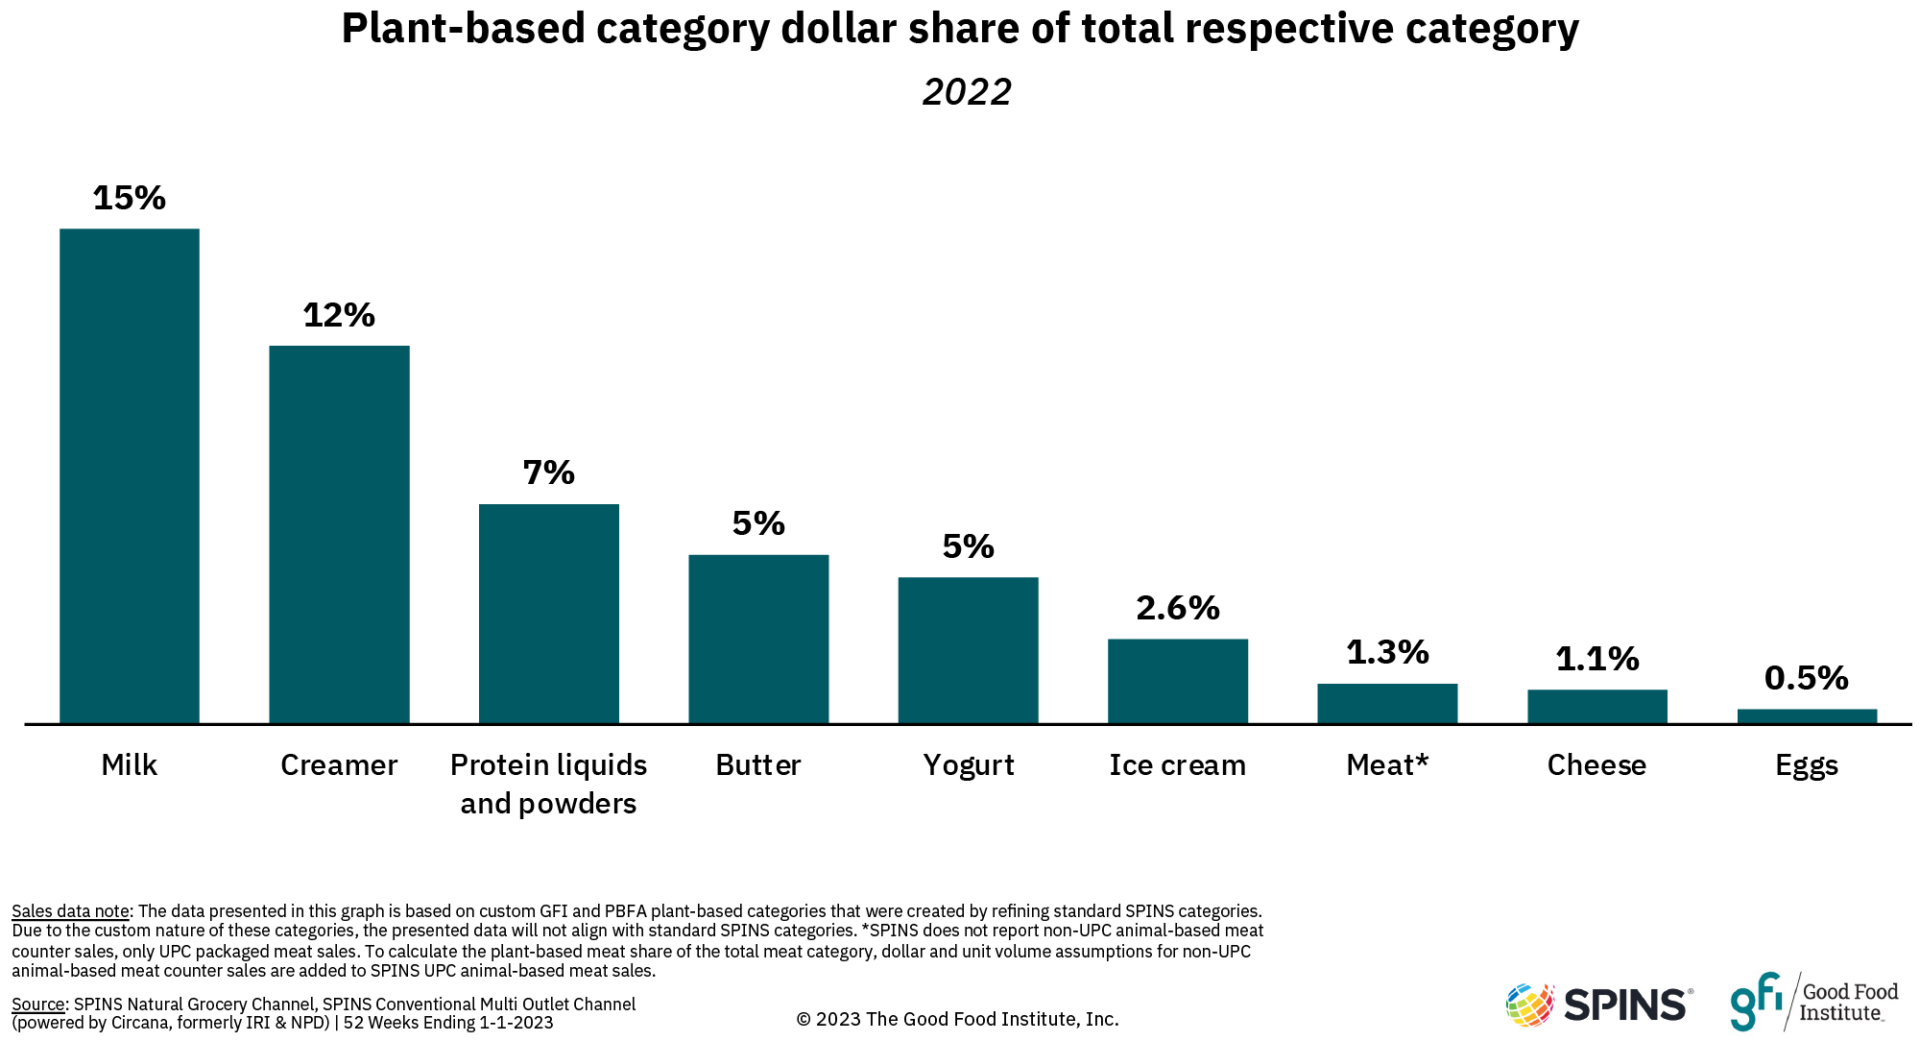 Plant-based dollar share of total respective category, 2022